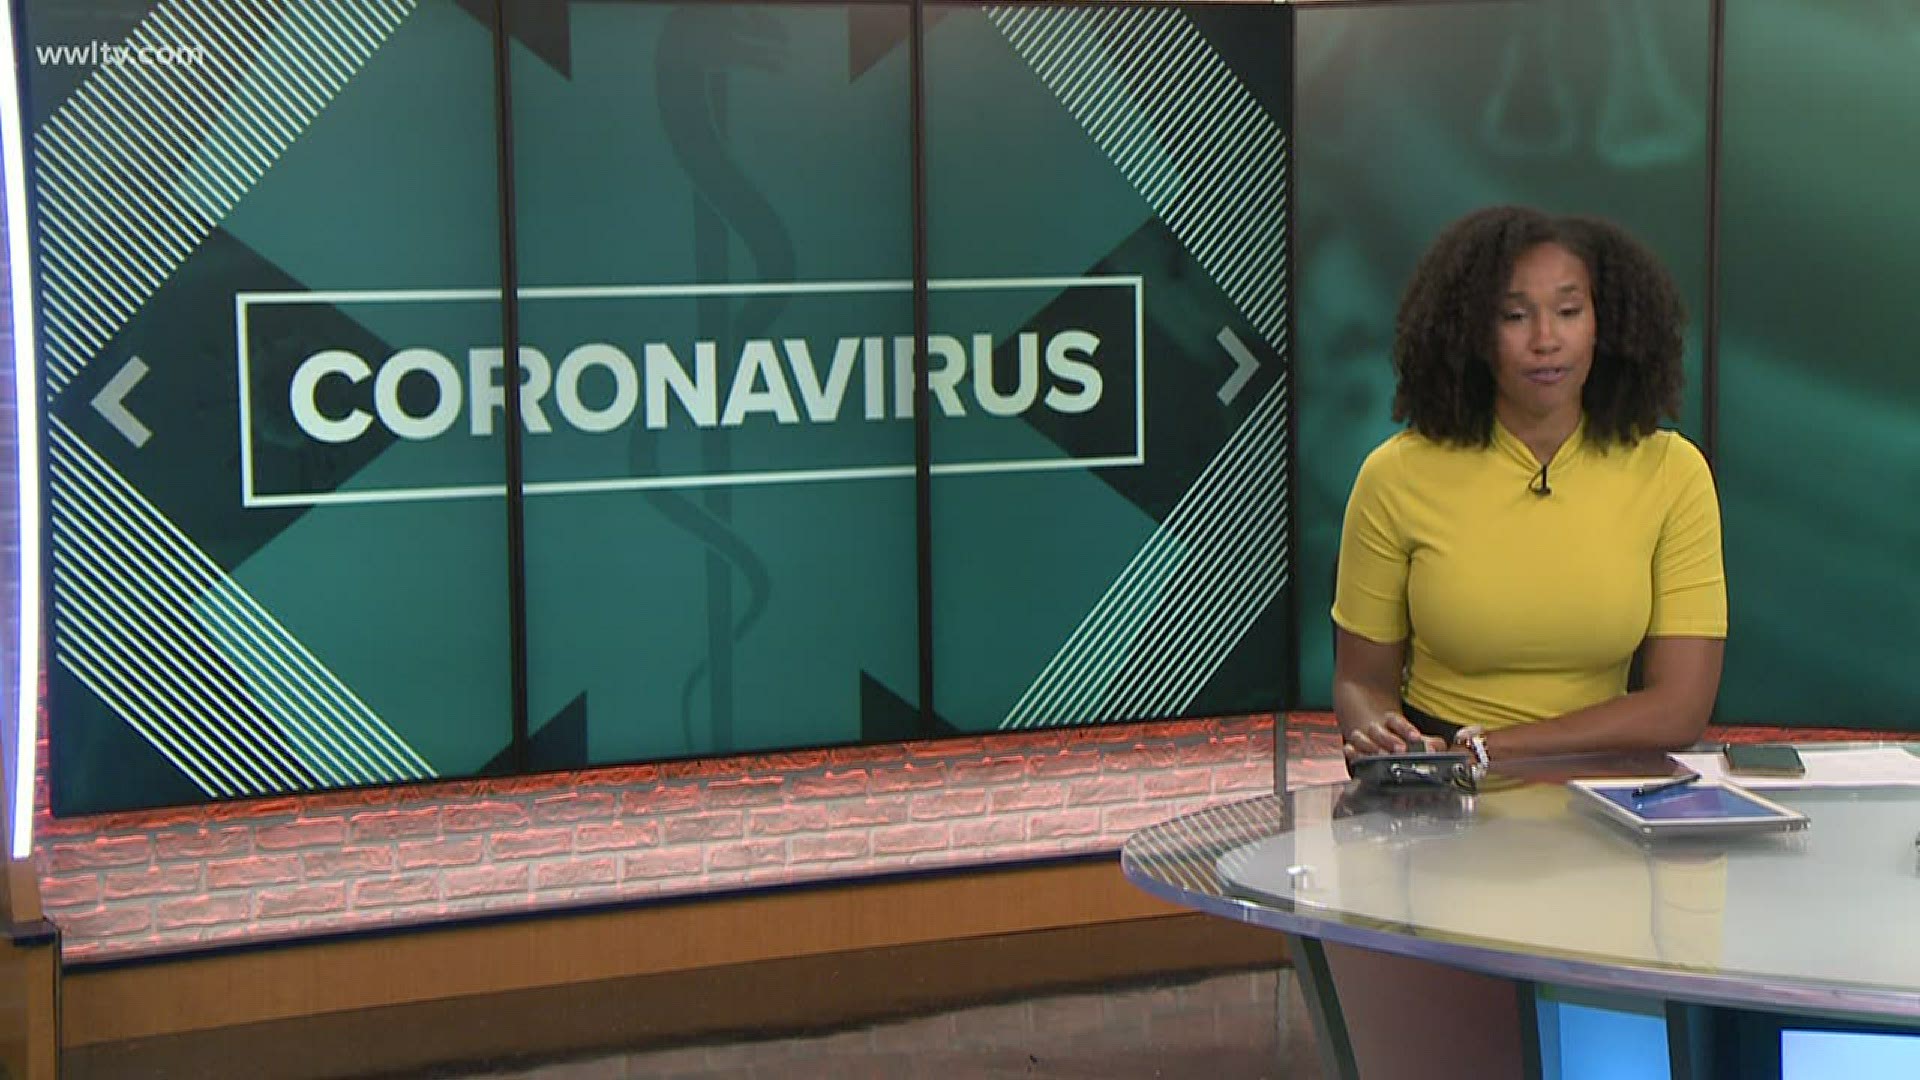 WWL-TV's Noon News update on the coronavirus outbreak in the United States, especially Louisiana.